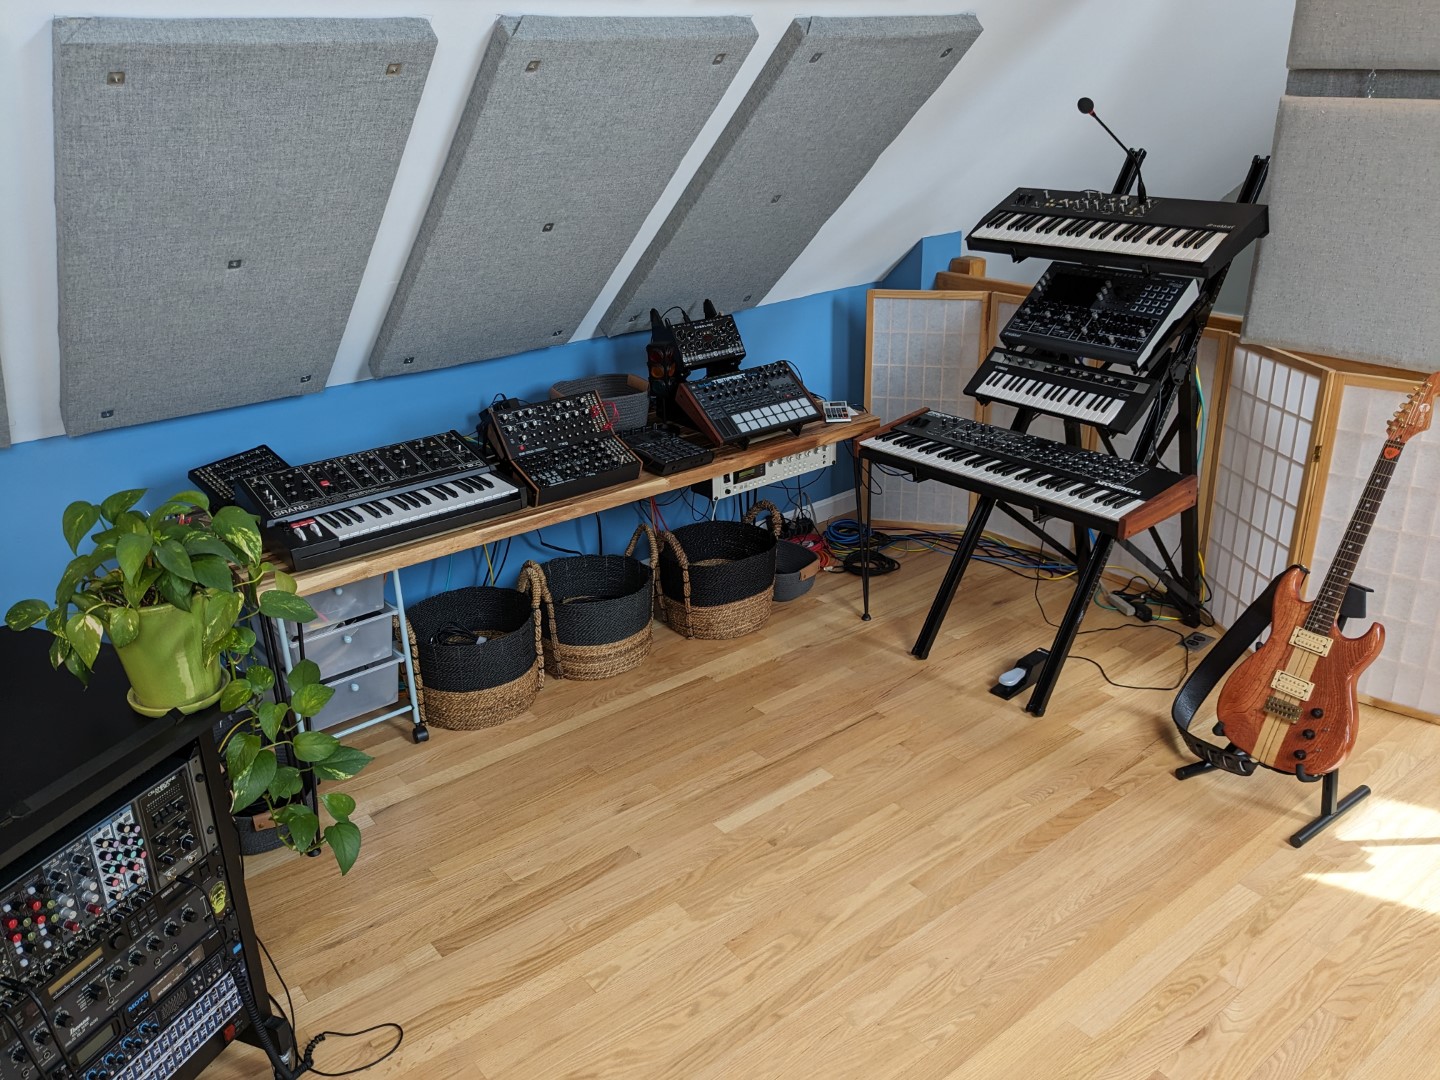 A desk and stand full of synths, a rack full of music gear, and an electric guitar